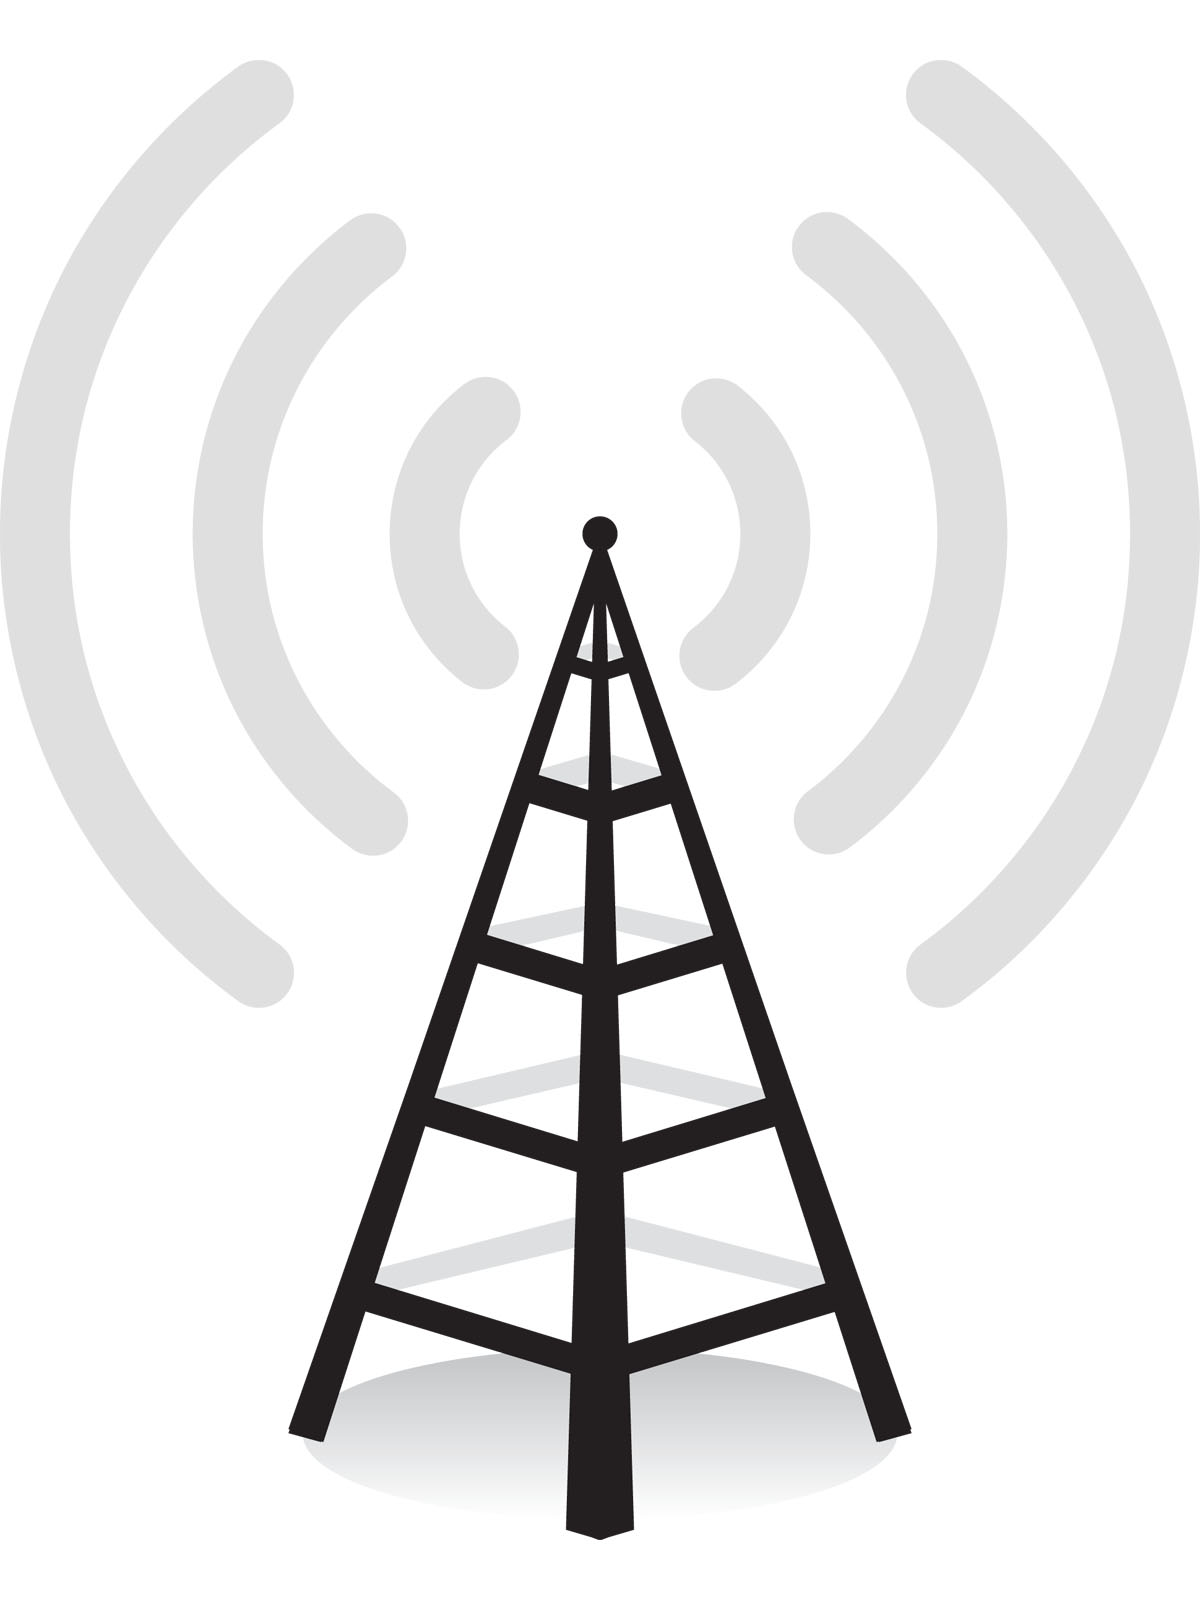 Radio Tower Logo Images u0026amp; Pictures - Becuo. Antenne clip art ...